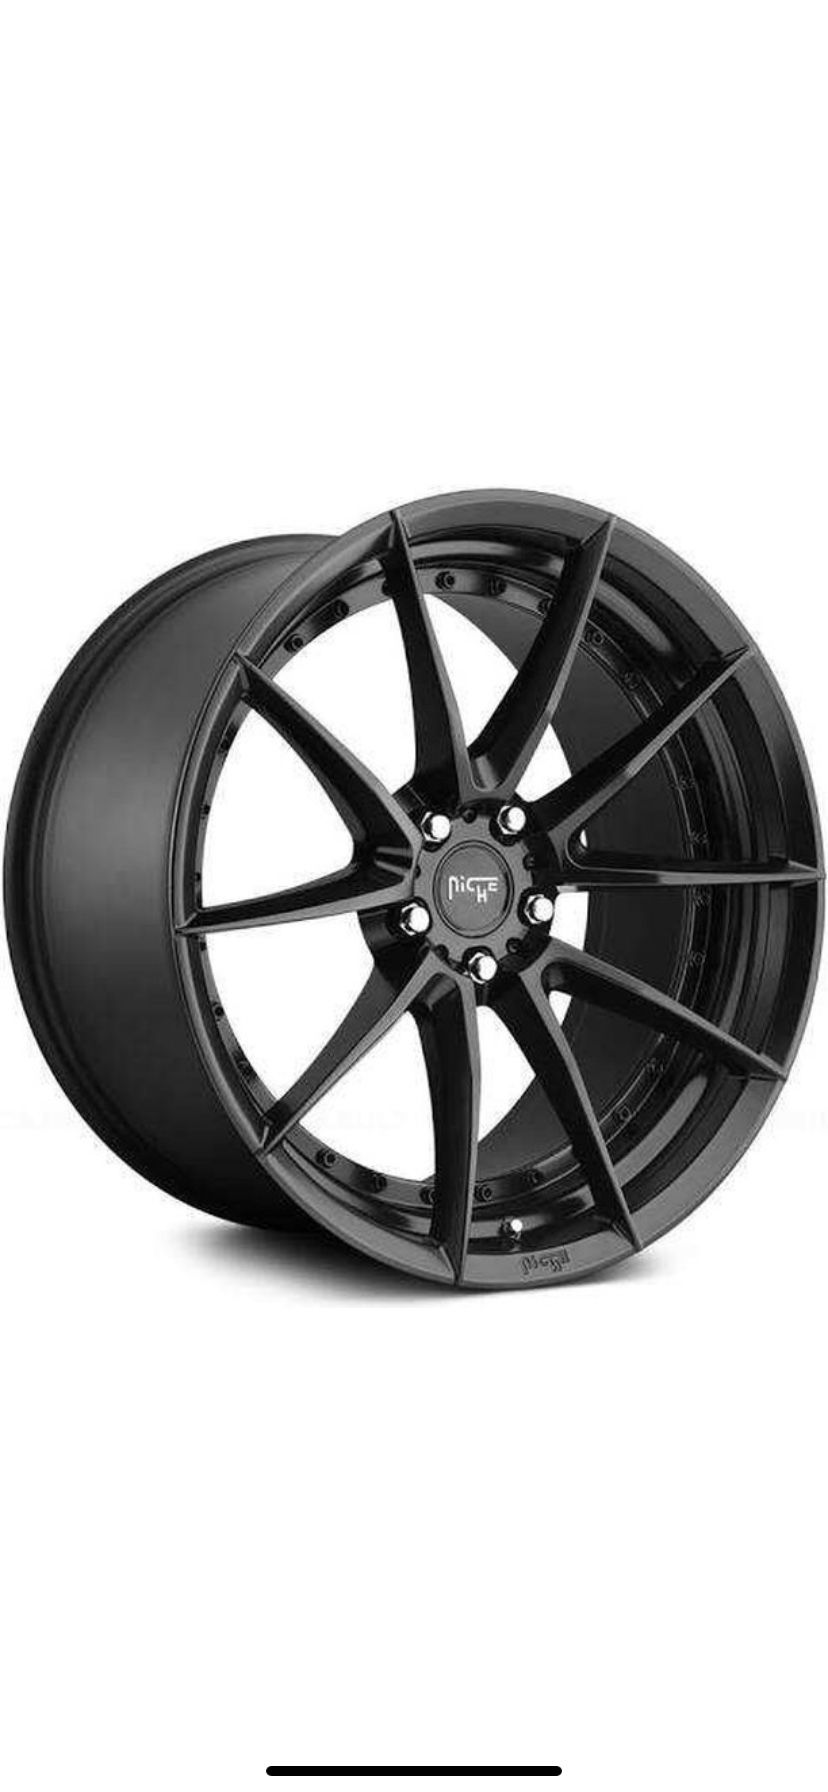 Niche sector m196 rims and tires